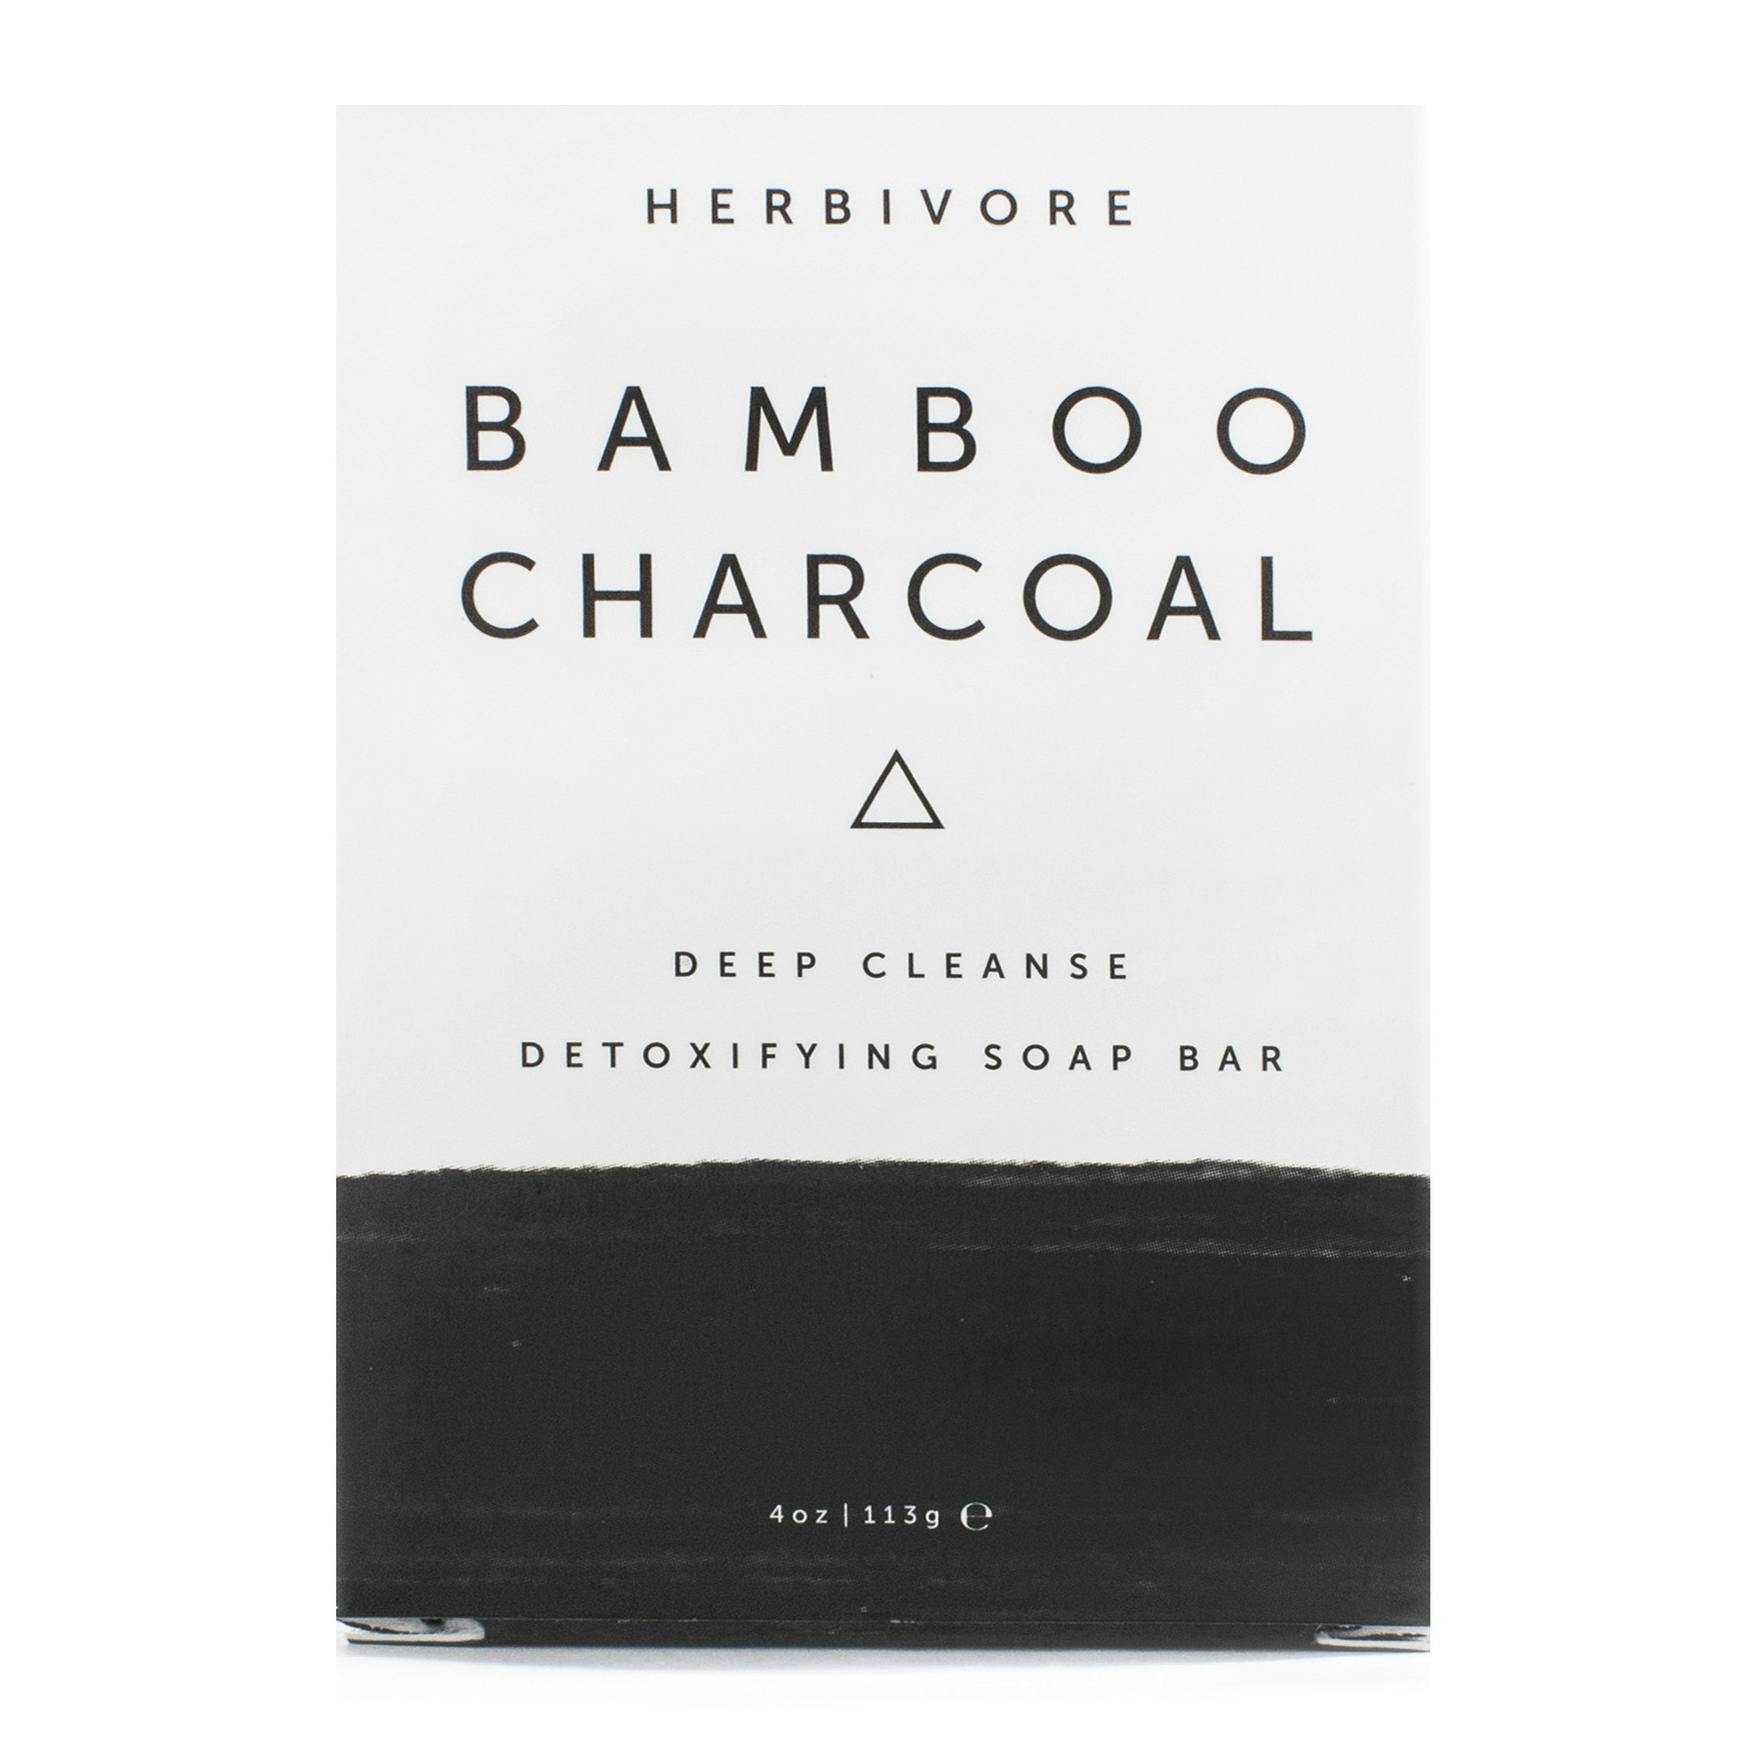 Herbivore Bamboo Charcoal Deep Cleansing Bar (4 oz)